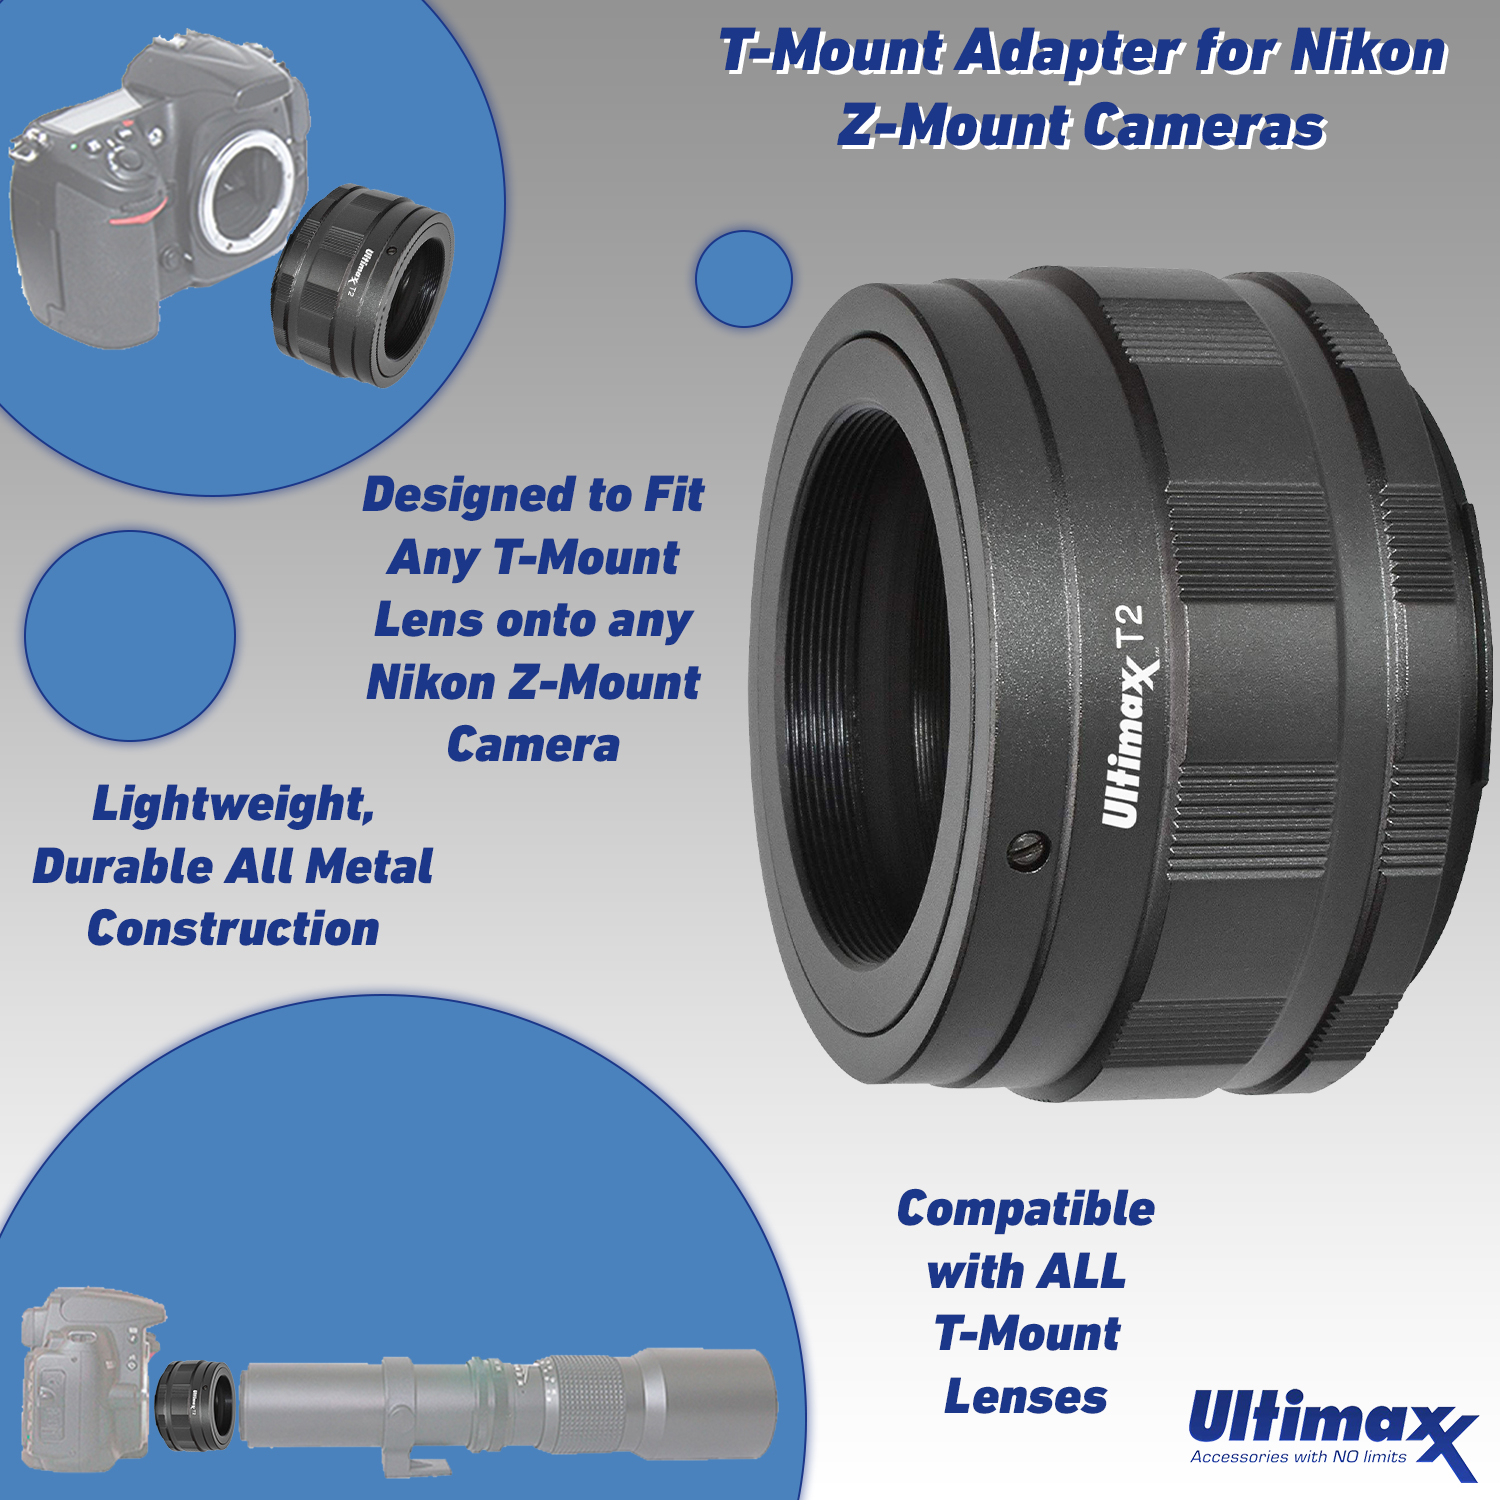 Ultimaxx 500mm f/8 Preset Telephoto Lens for Nikon Z7 Z7II Z6 Z6II Z5 Z50 Mirrorless Camera & Other Z-Mount Cameras with Basic Accessory Bundle - Includes: 2x Converter for T-Mount Lenses & More - image 5 of 6